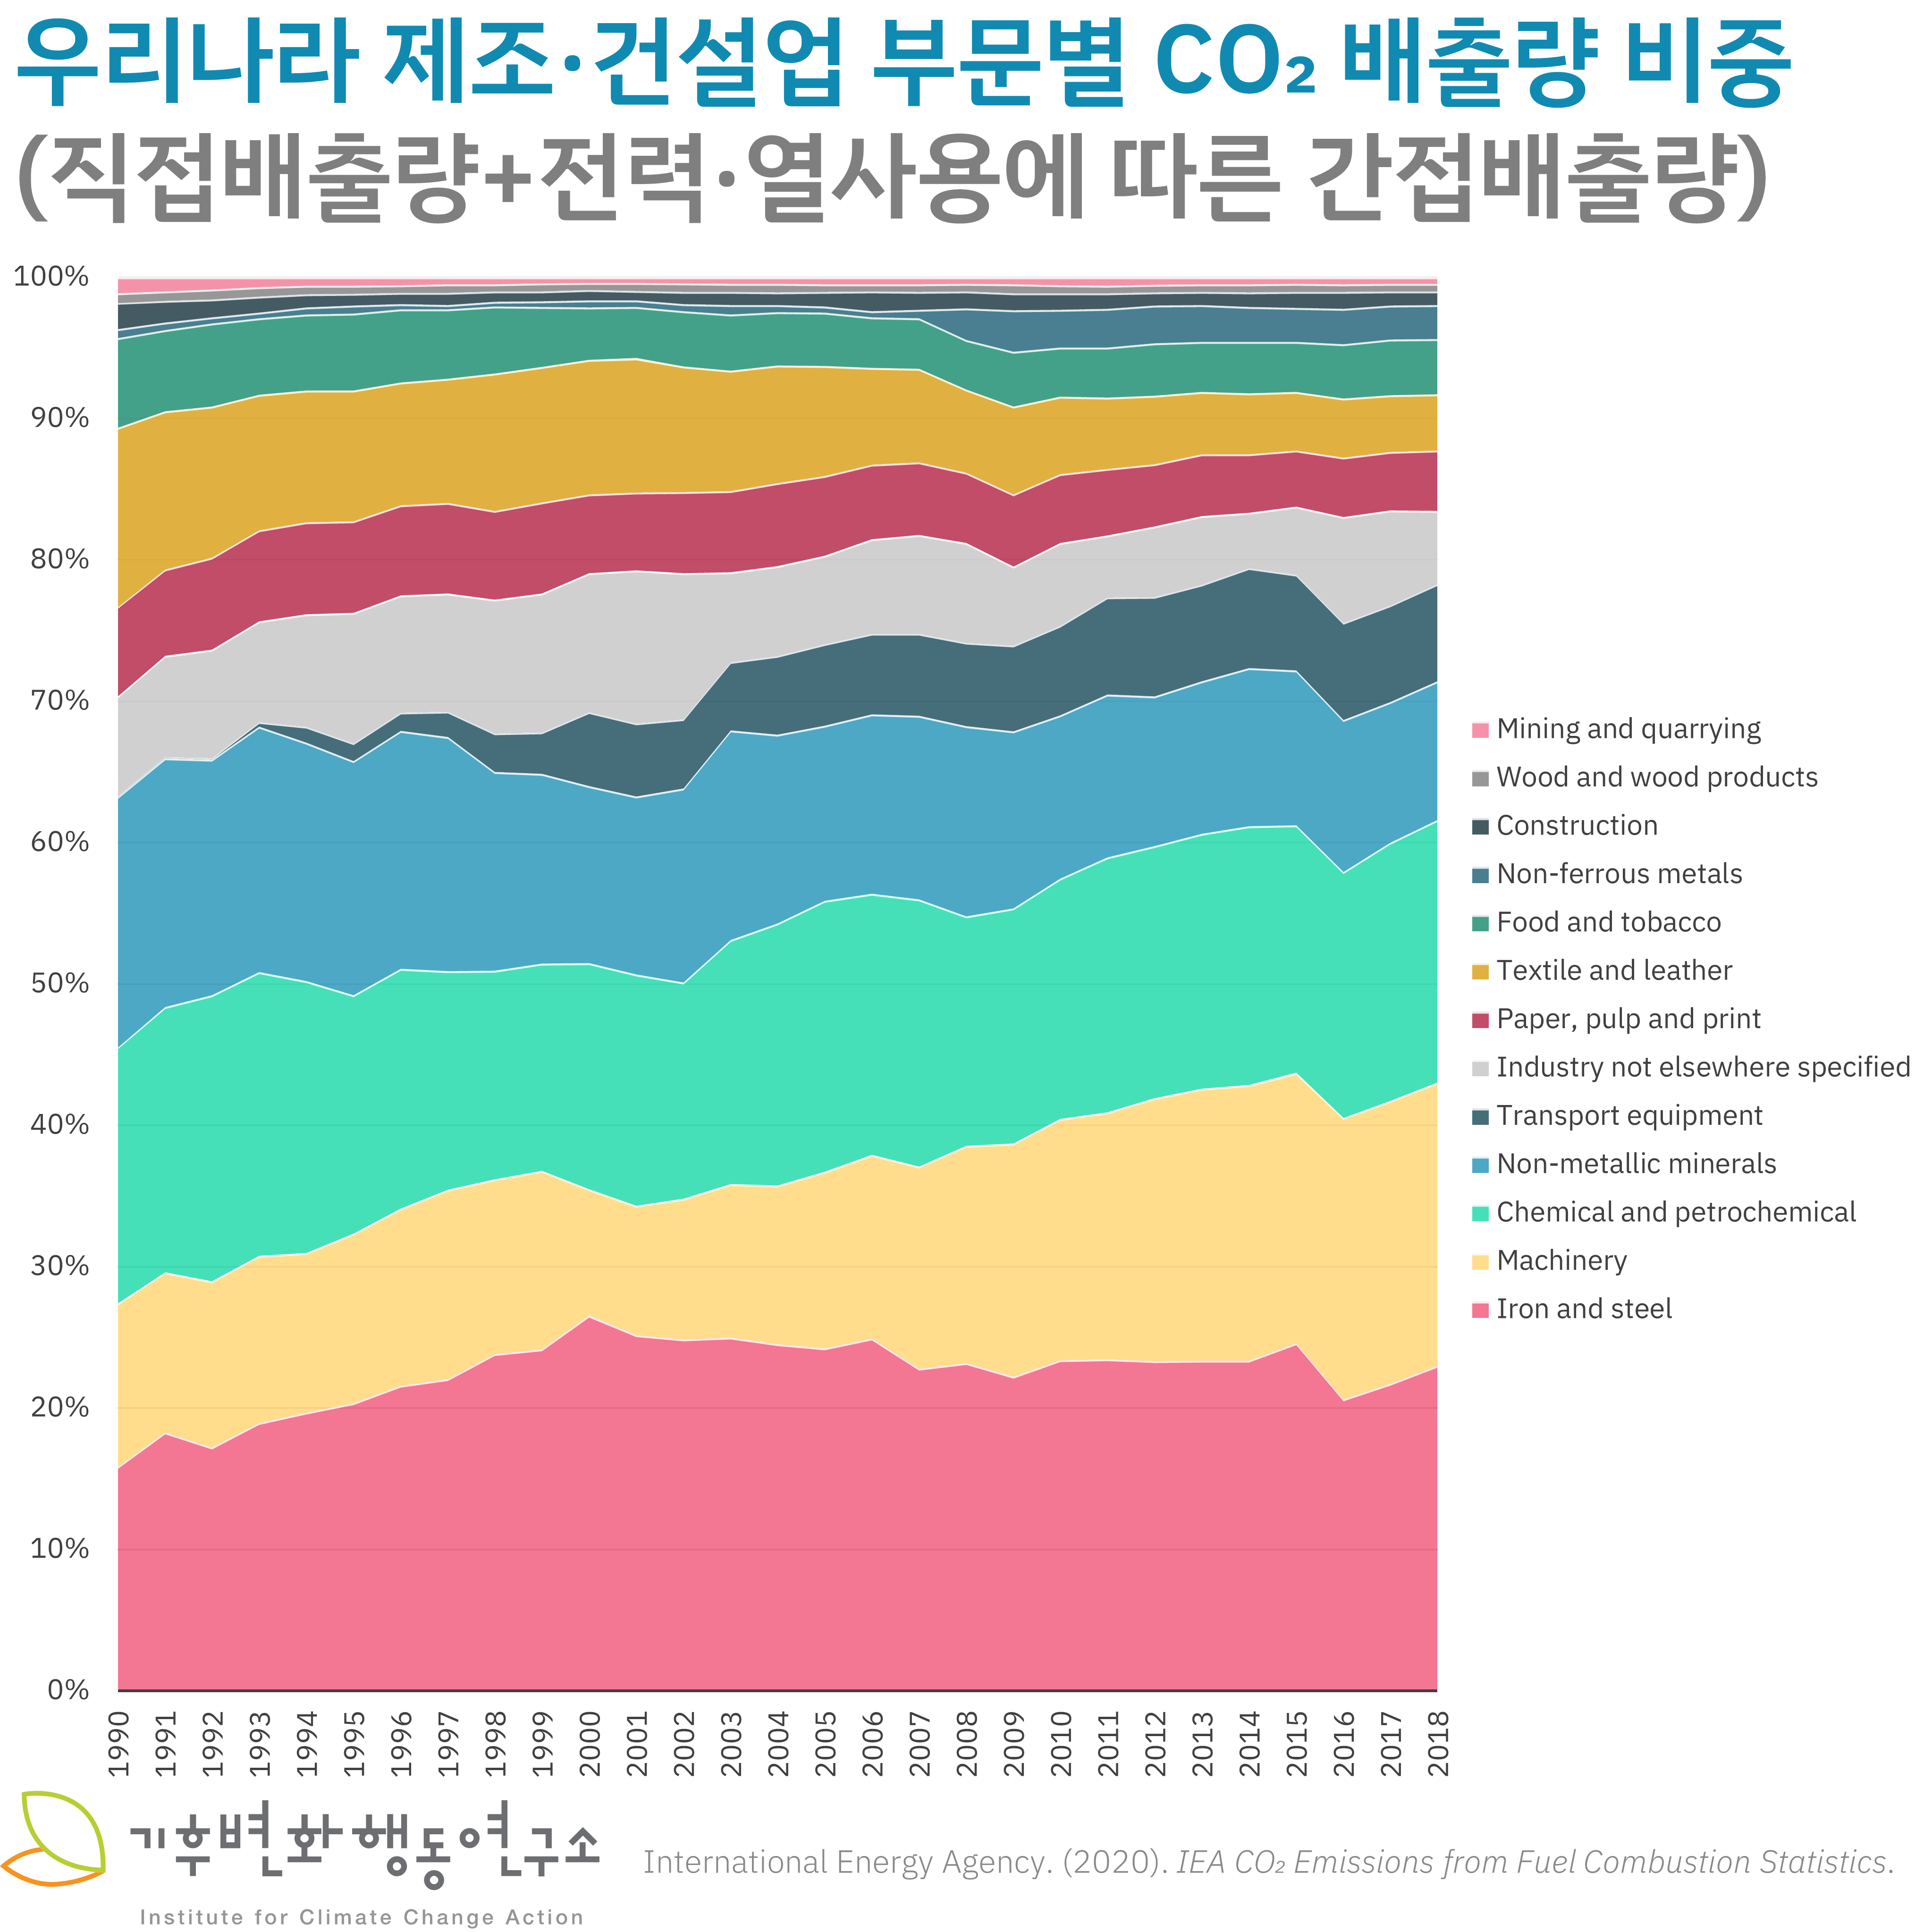 Industrial-Emissions-ROK-Sectoral.png